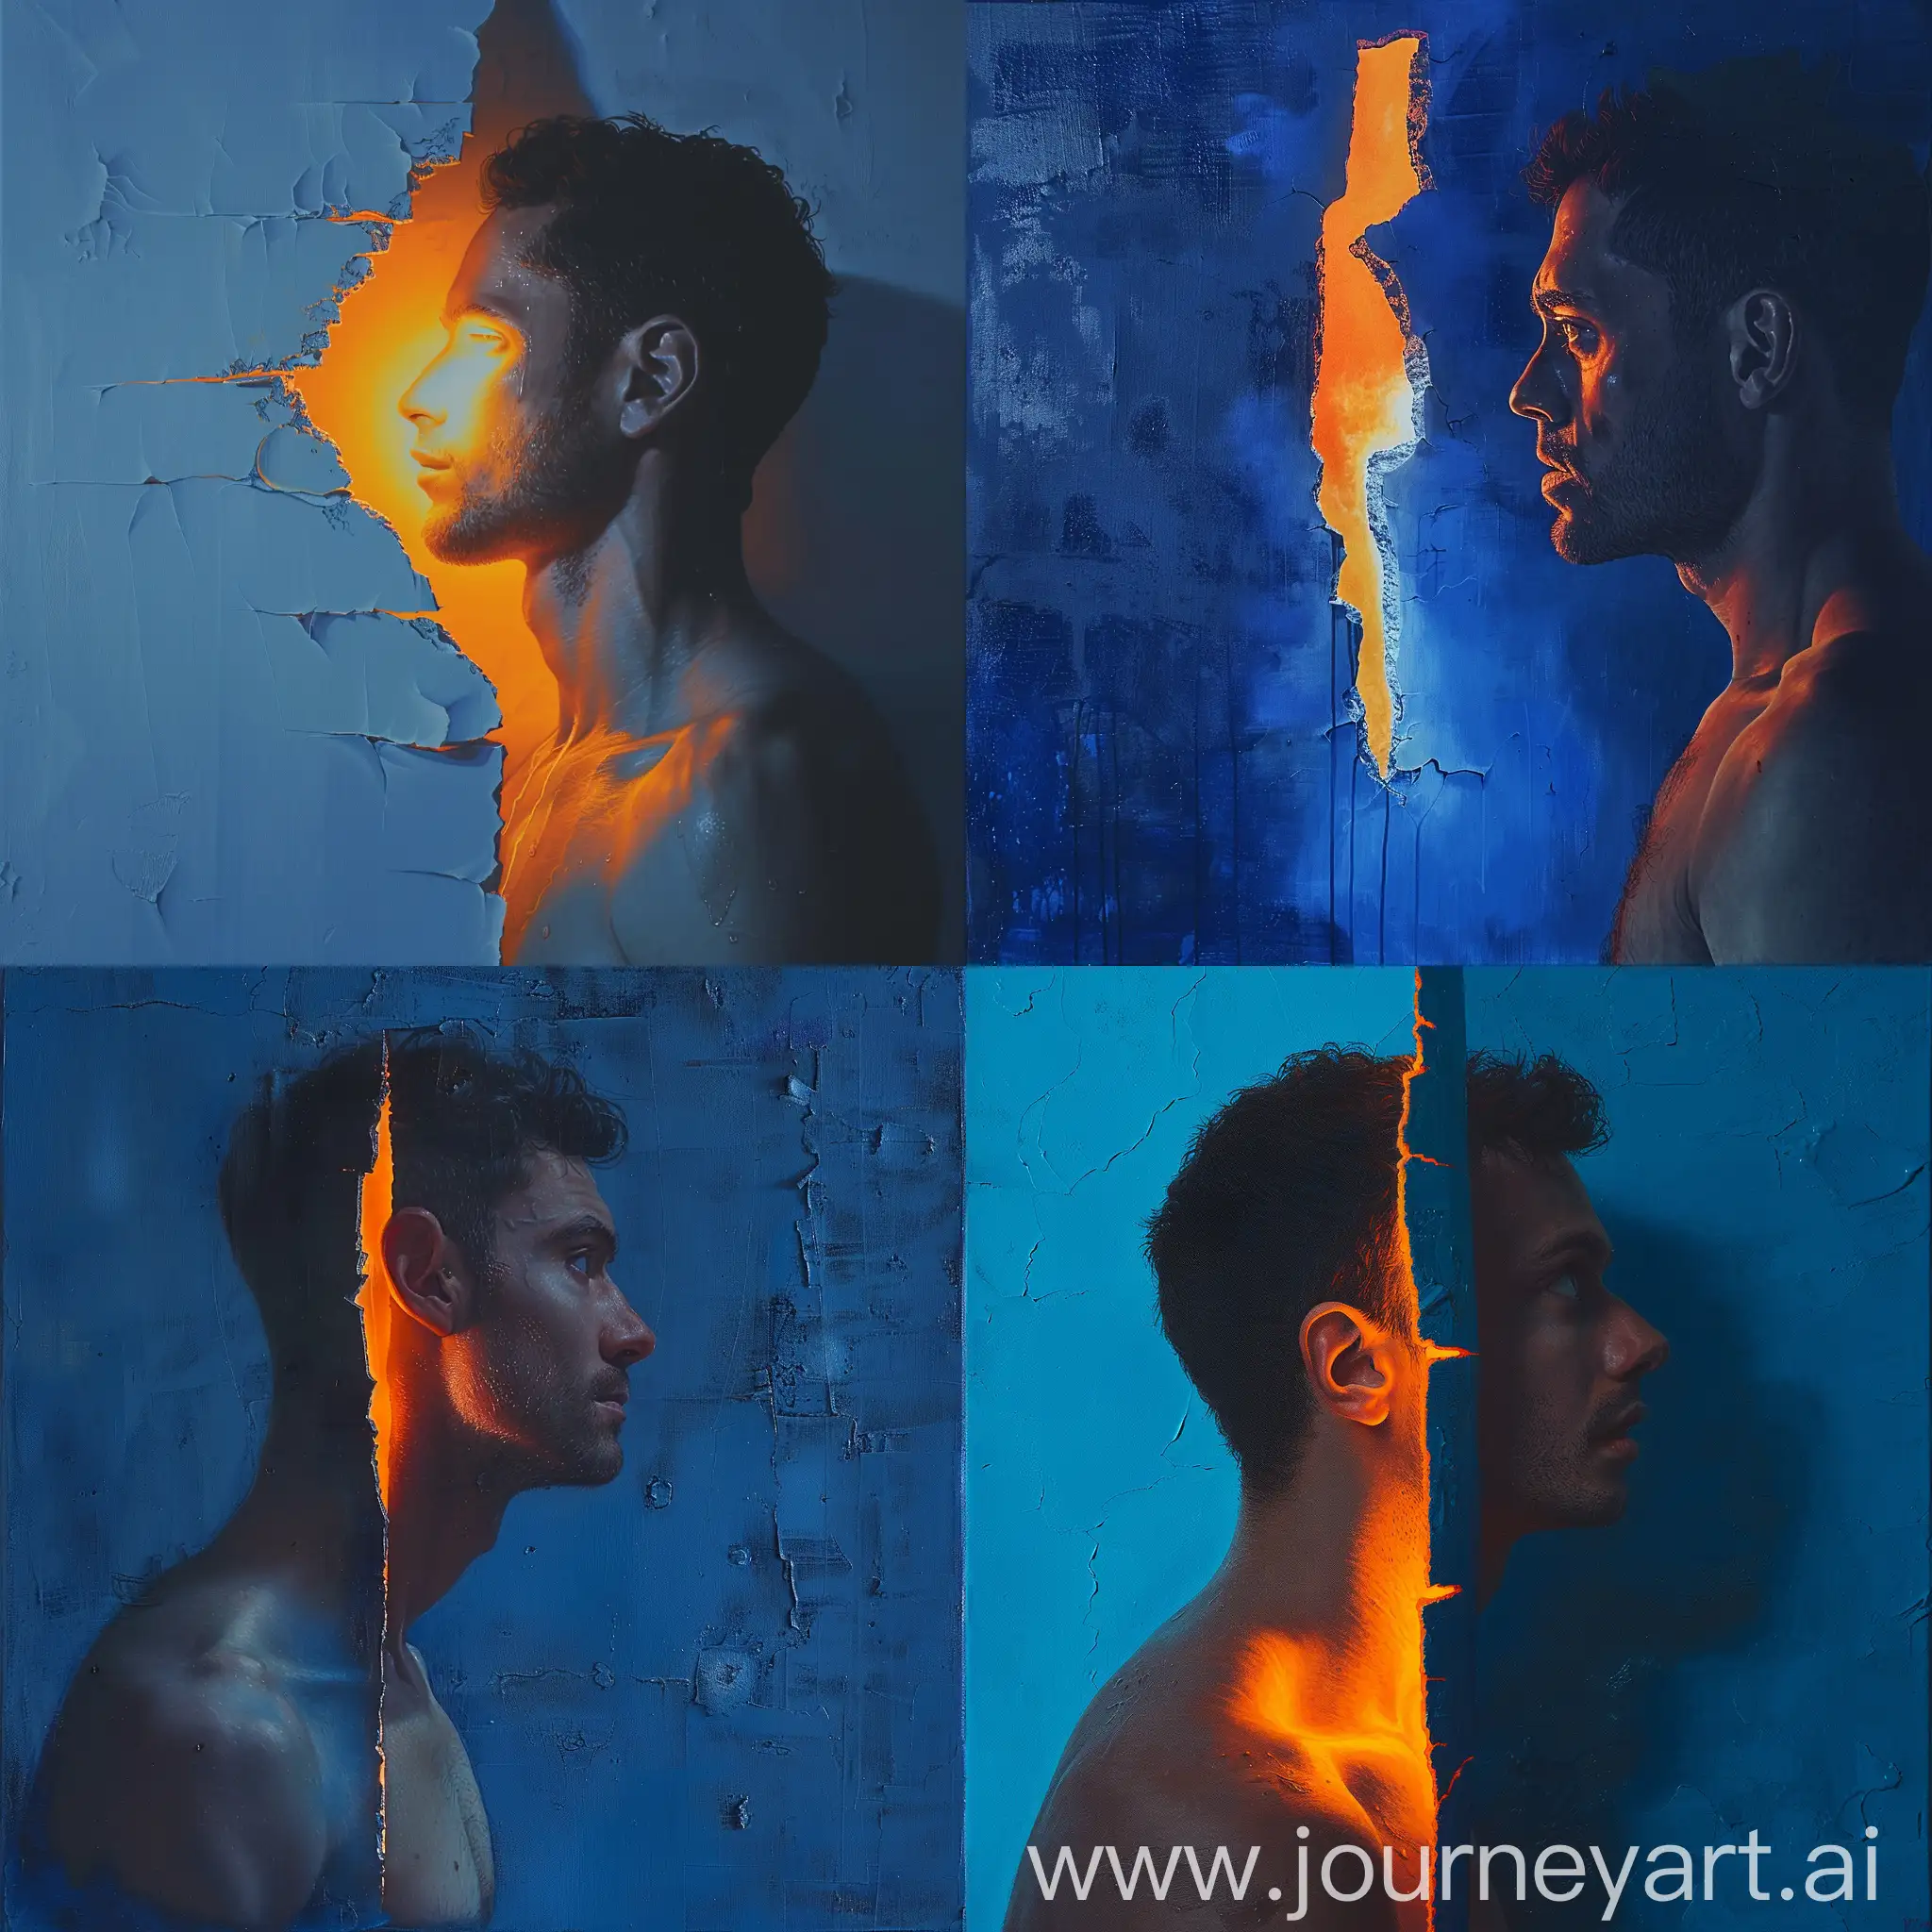 man staring from the side to a tear in blue canvas. From the tear an orange backlight hightlights the face of the man. The face and torso are shown and the man is shirtless